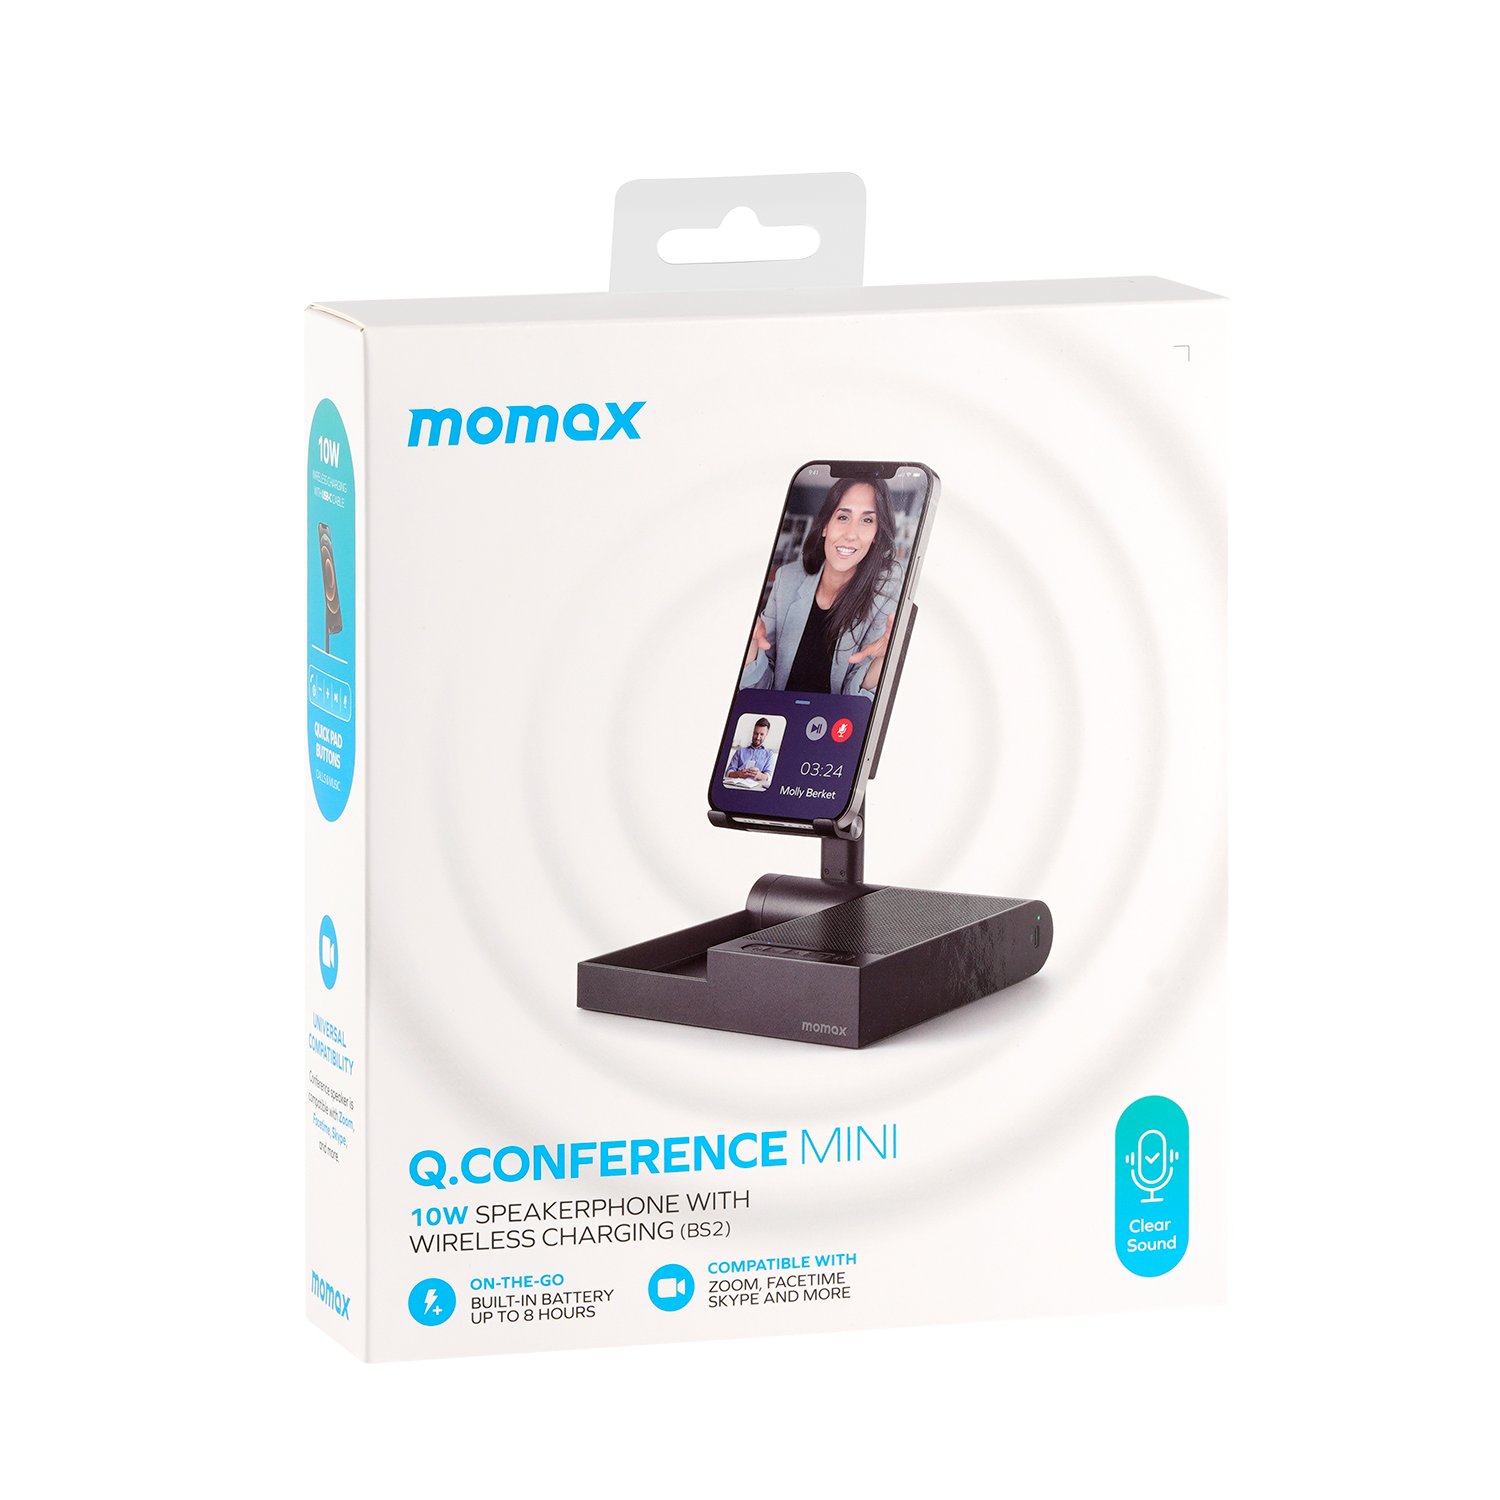 Momax Q.Conference Mini Speakerphone with 10W Wireless Charging